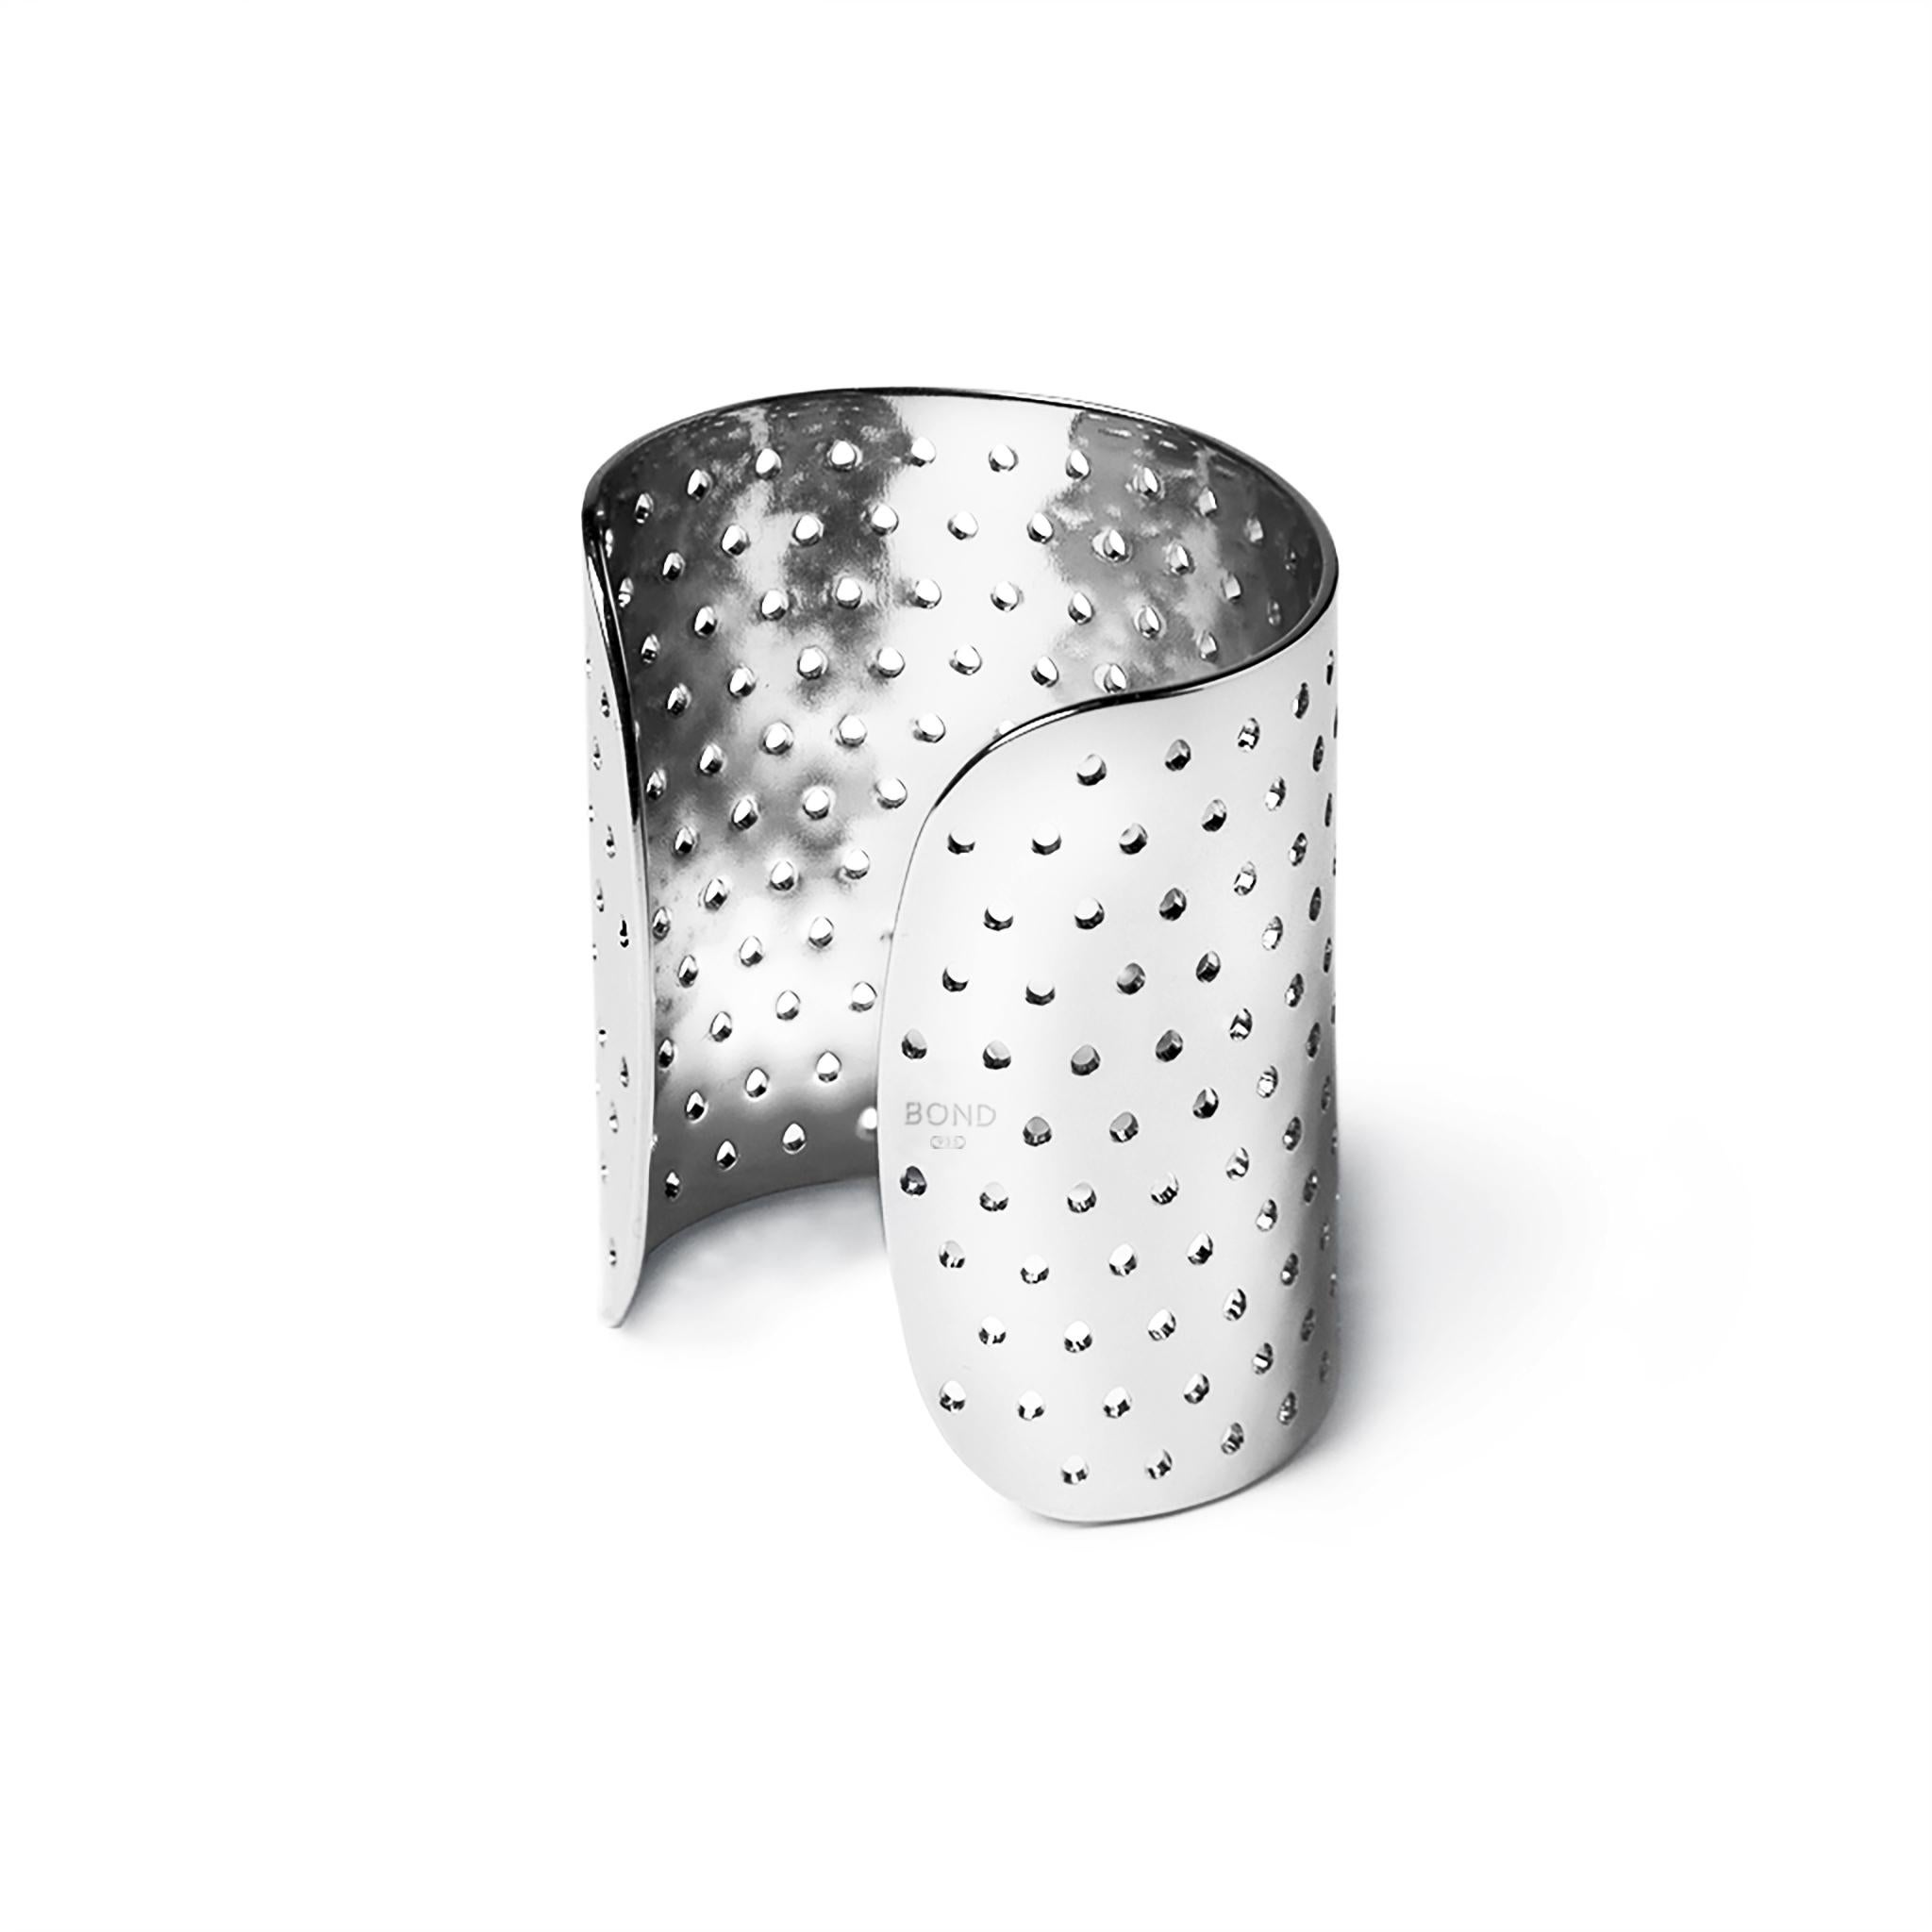 Breathable, perforated metal cuff bracelet in solid, hypoallergenic 935 Silver. Wear alone, as a set, or as part of a stack. 

FEATURES
- Available in a selection of sustainable, recycled metals: 935 Silver or 18K Gold.
- Hypoallergenic,